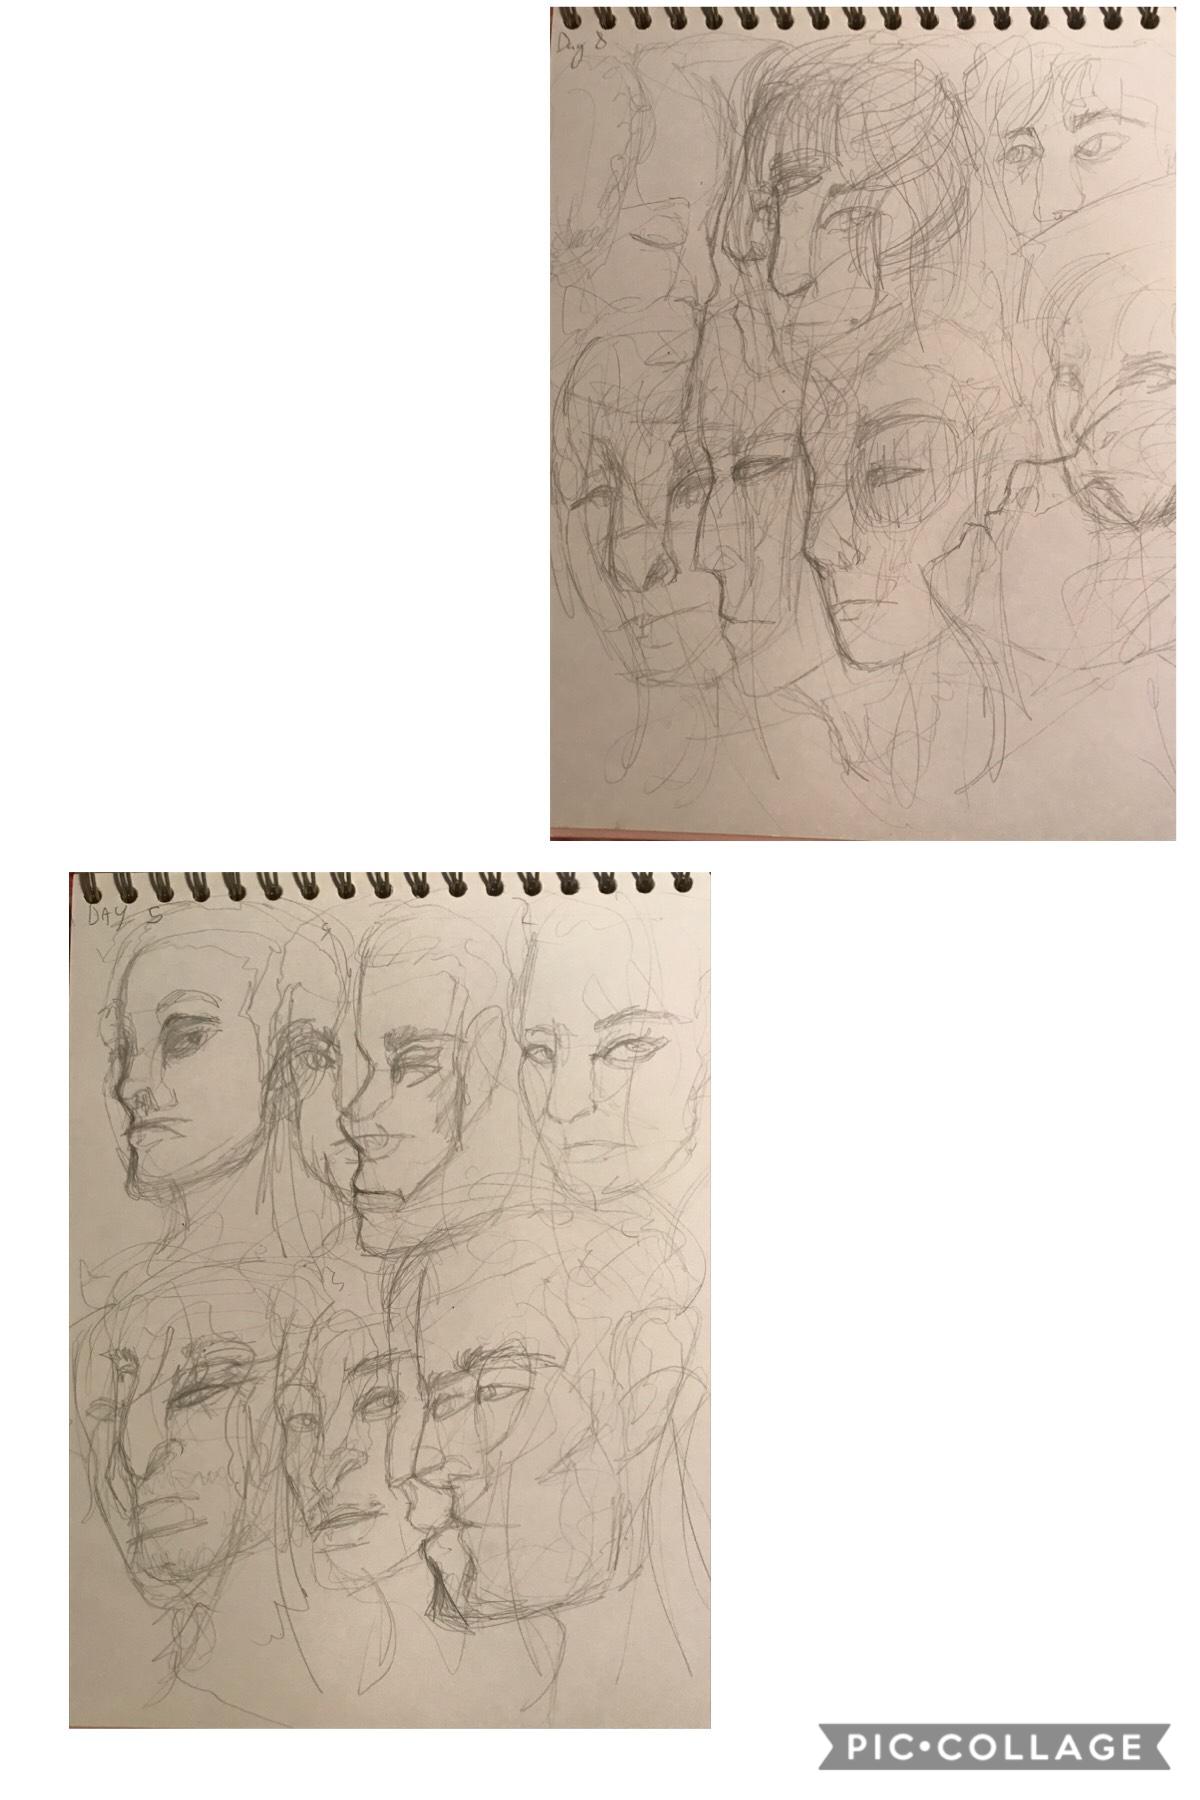 I also like did the 100 head challenge 